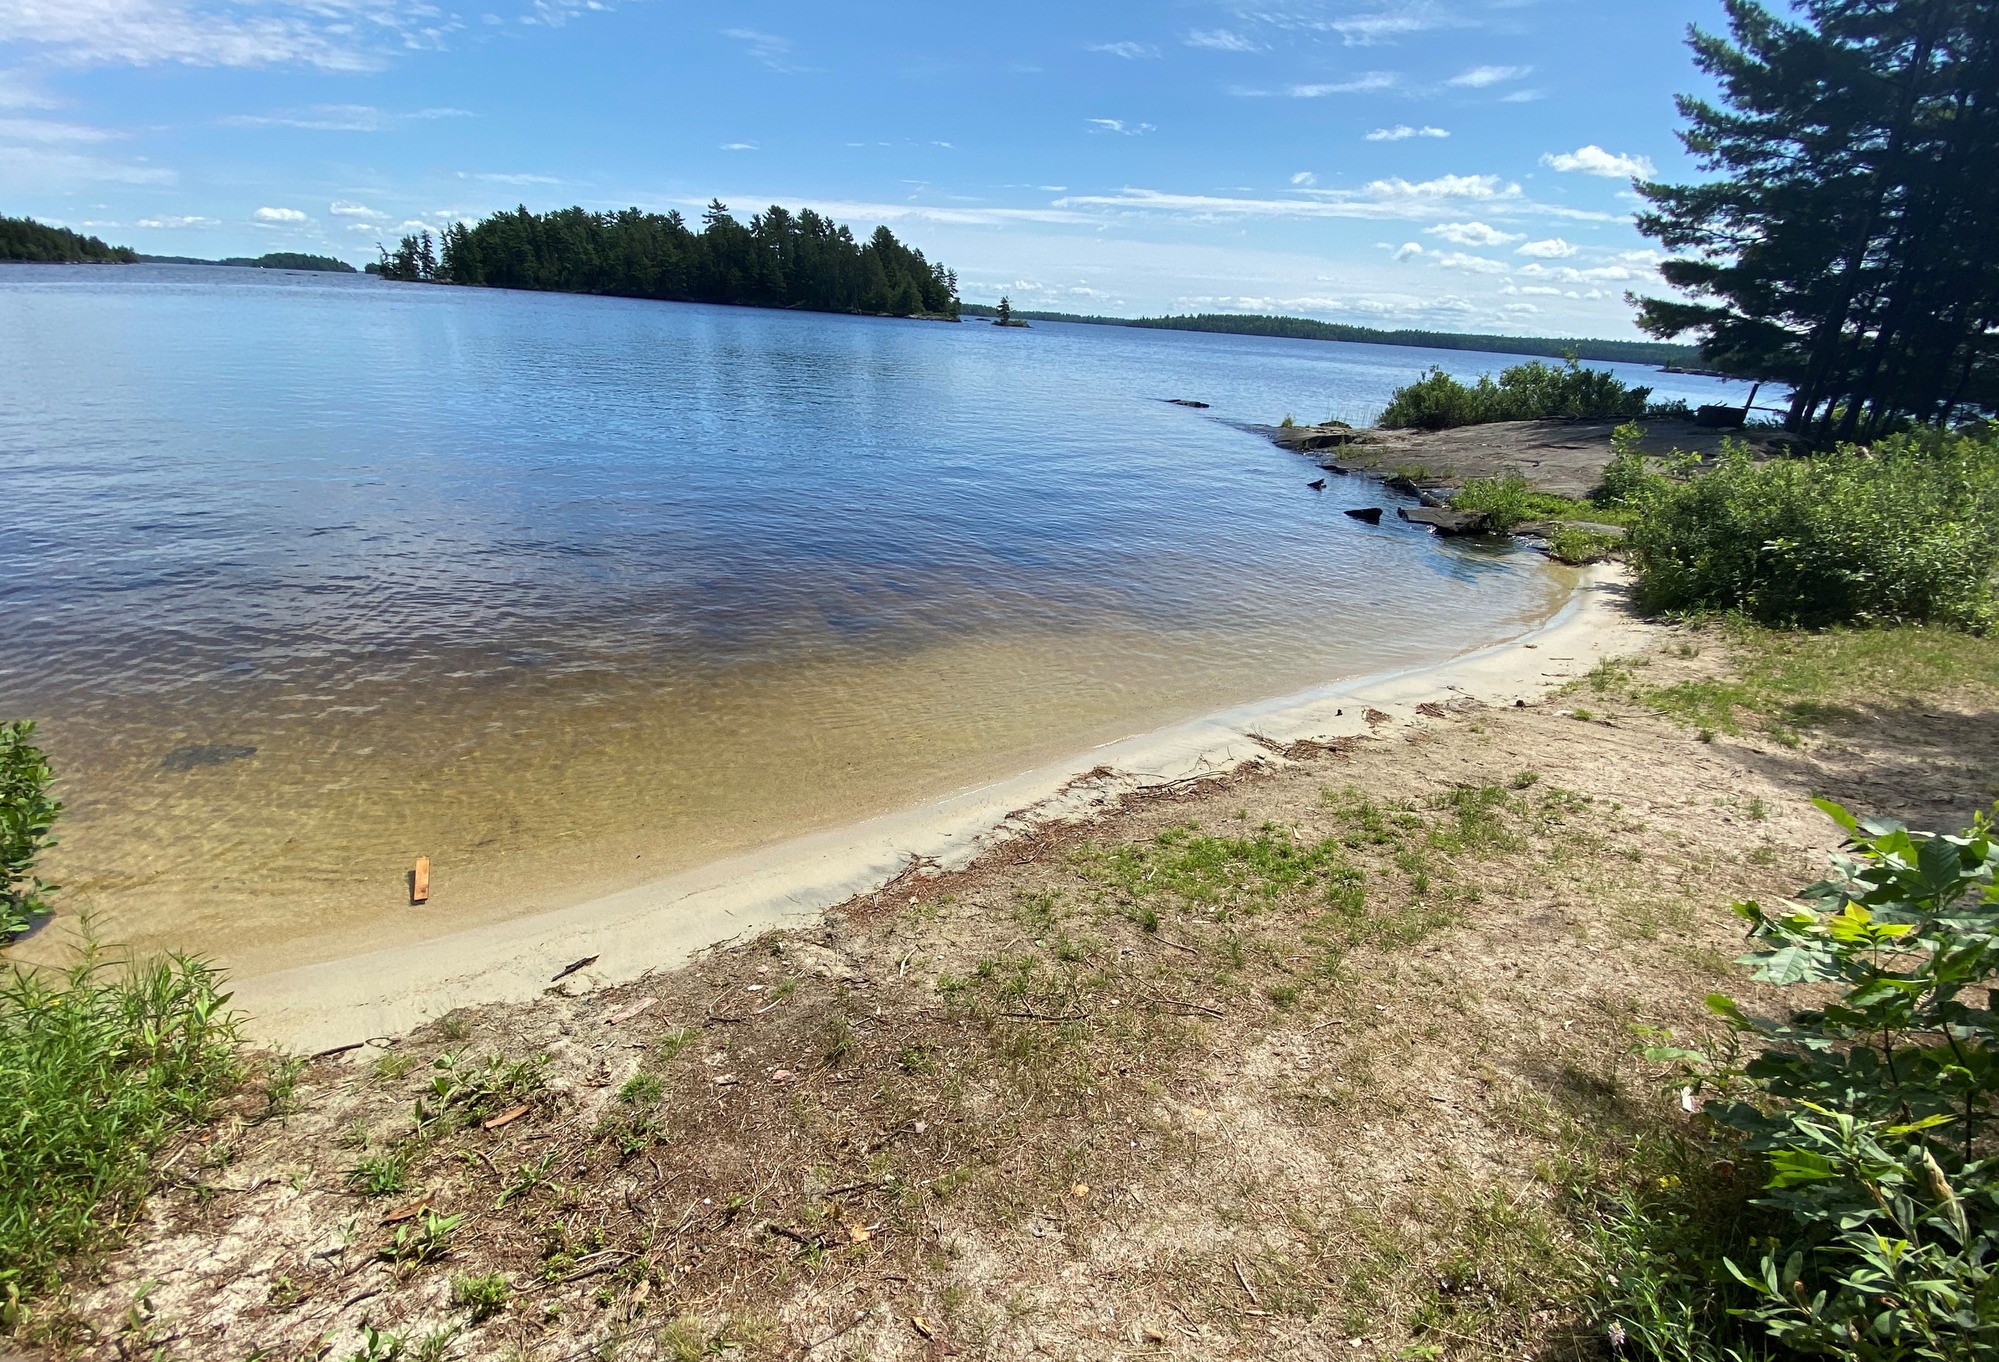 View of houseboat site beach access from shore with site core on right of image. An tree covered island is in the background across the water.